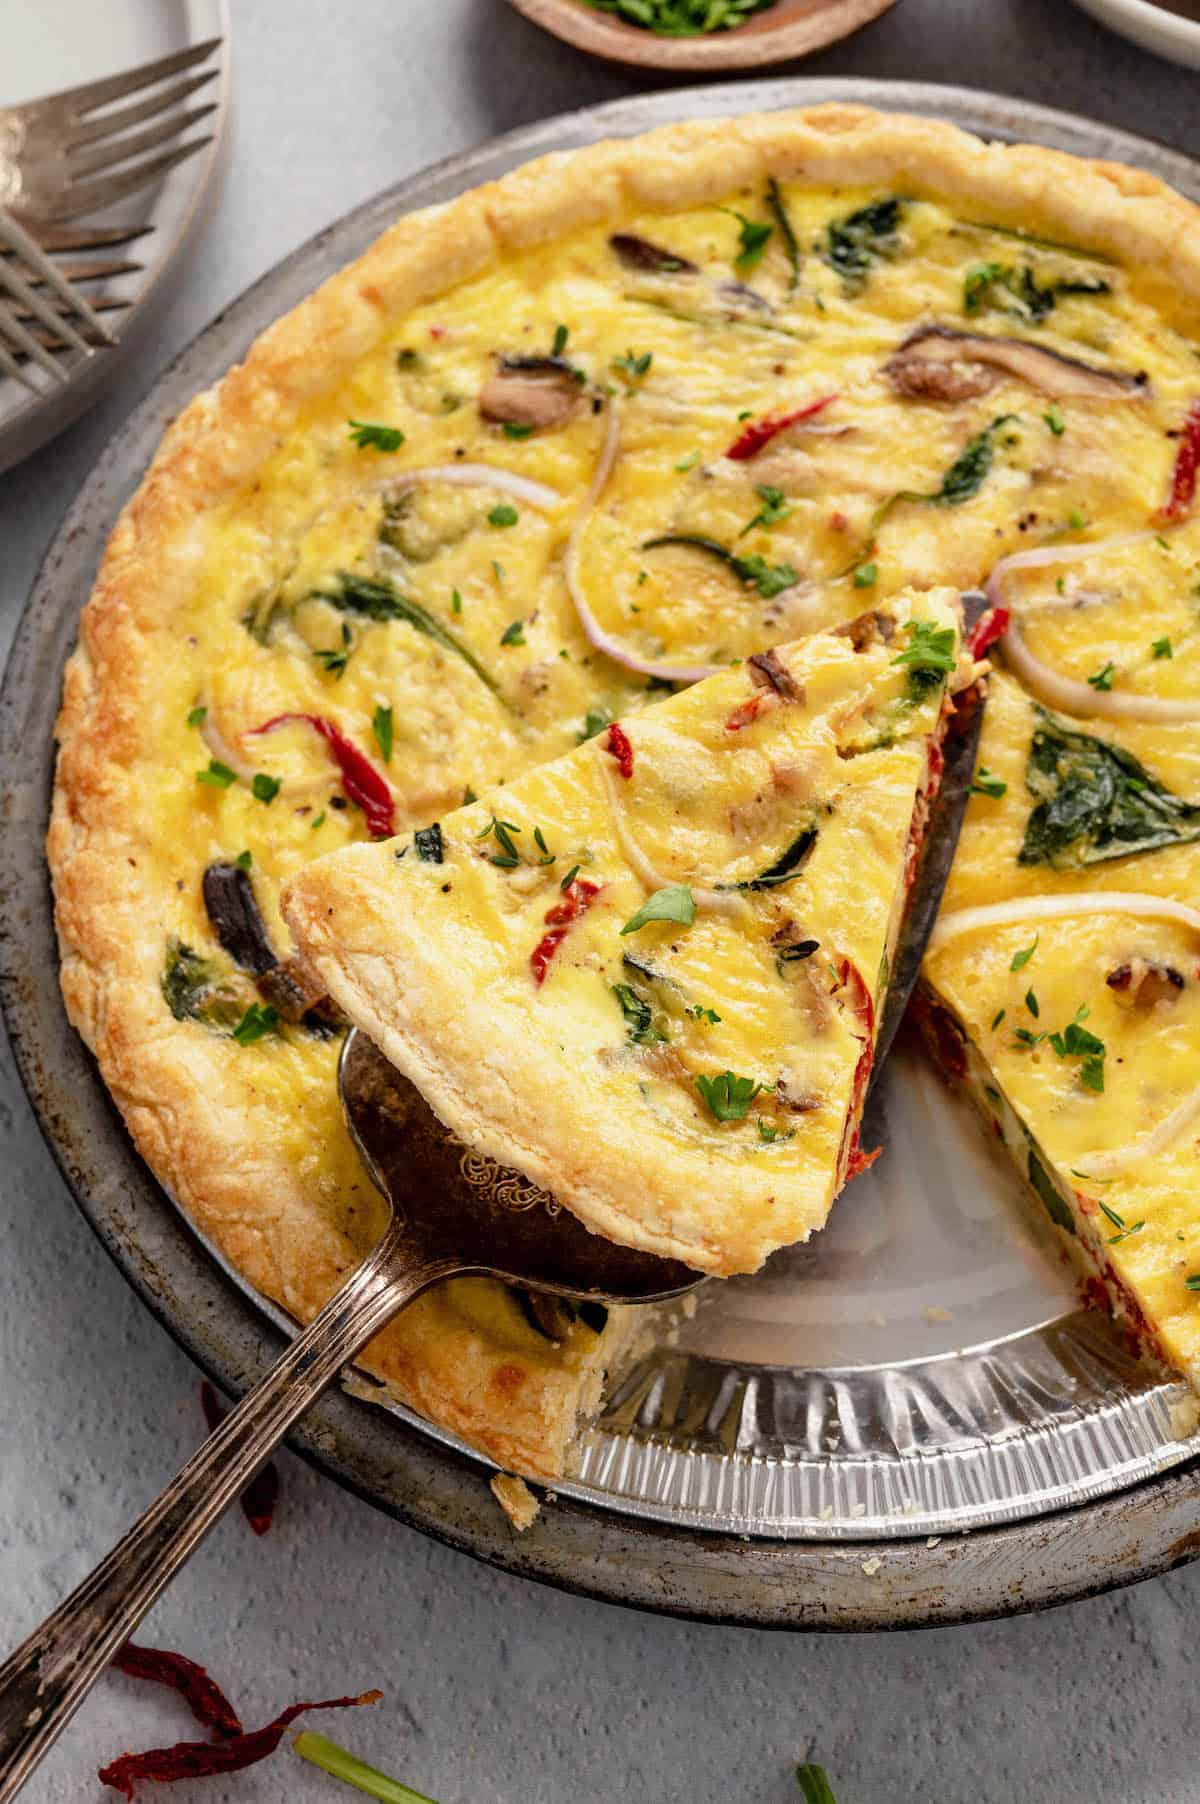 Vegetarian Quiche Recipes: How to Make Savory and Nutritious Meals